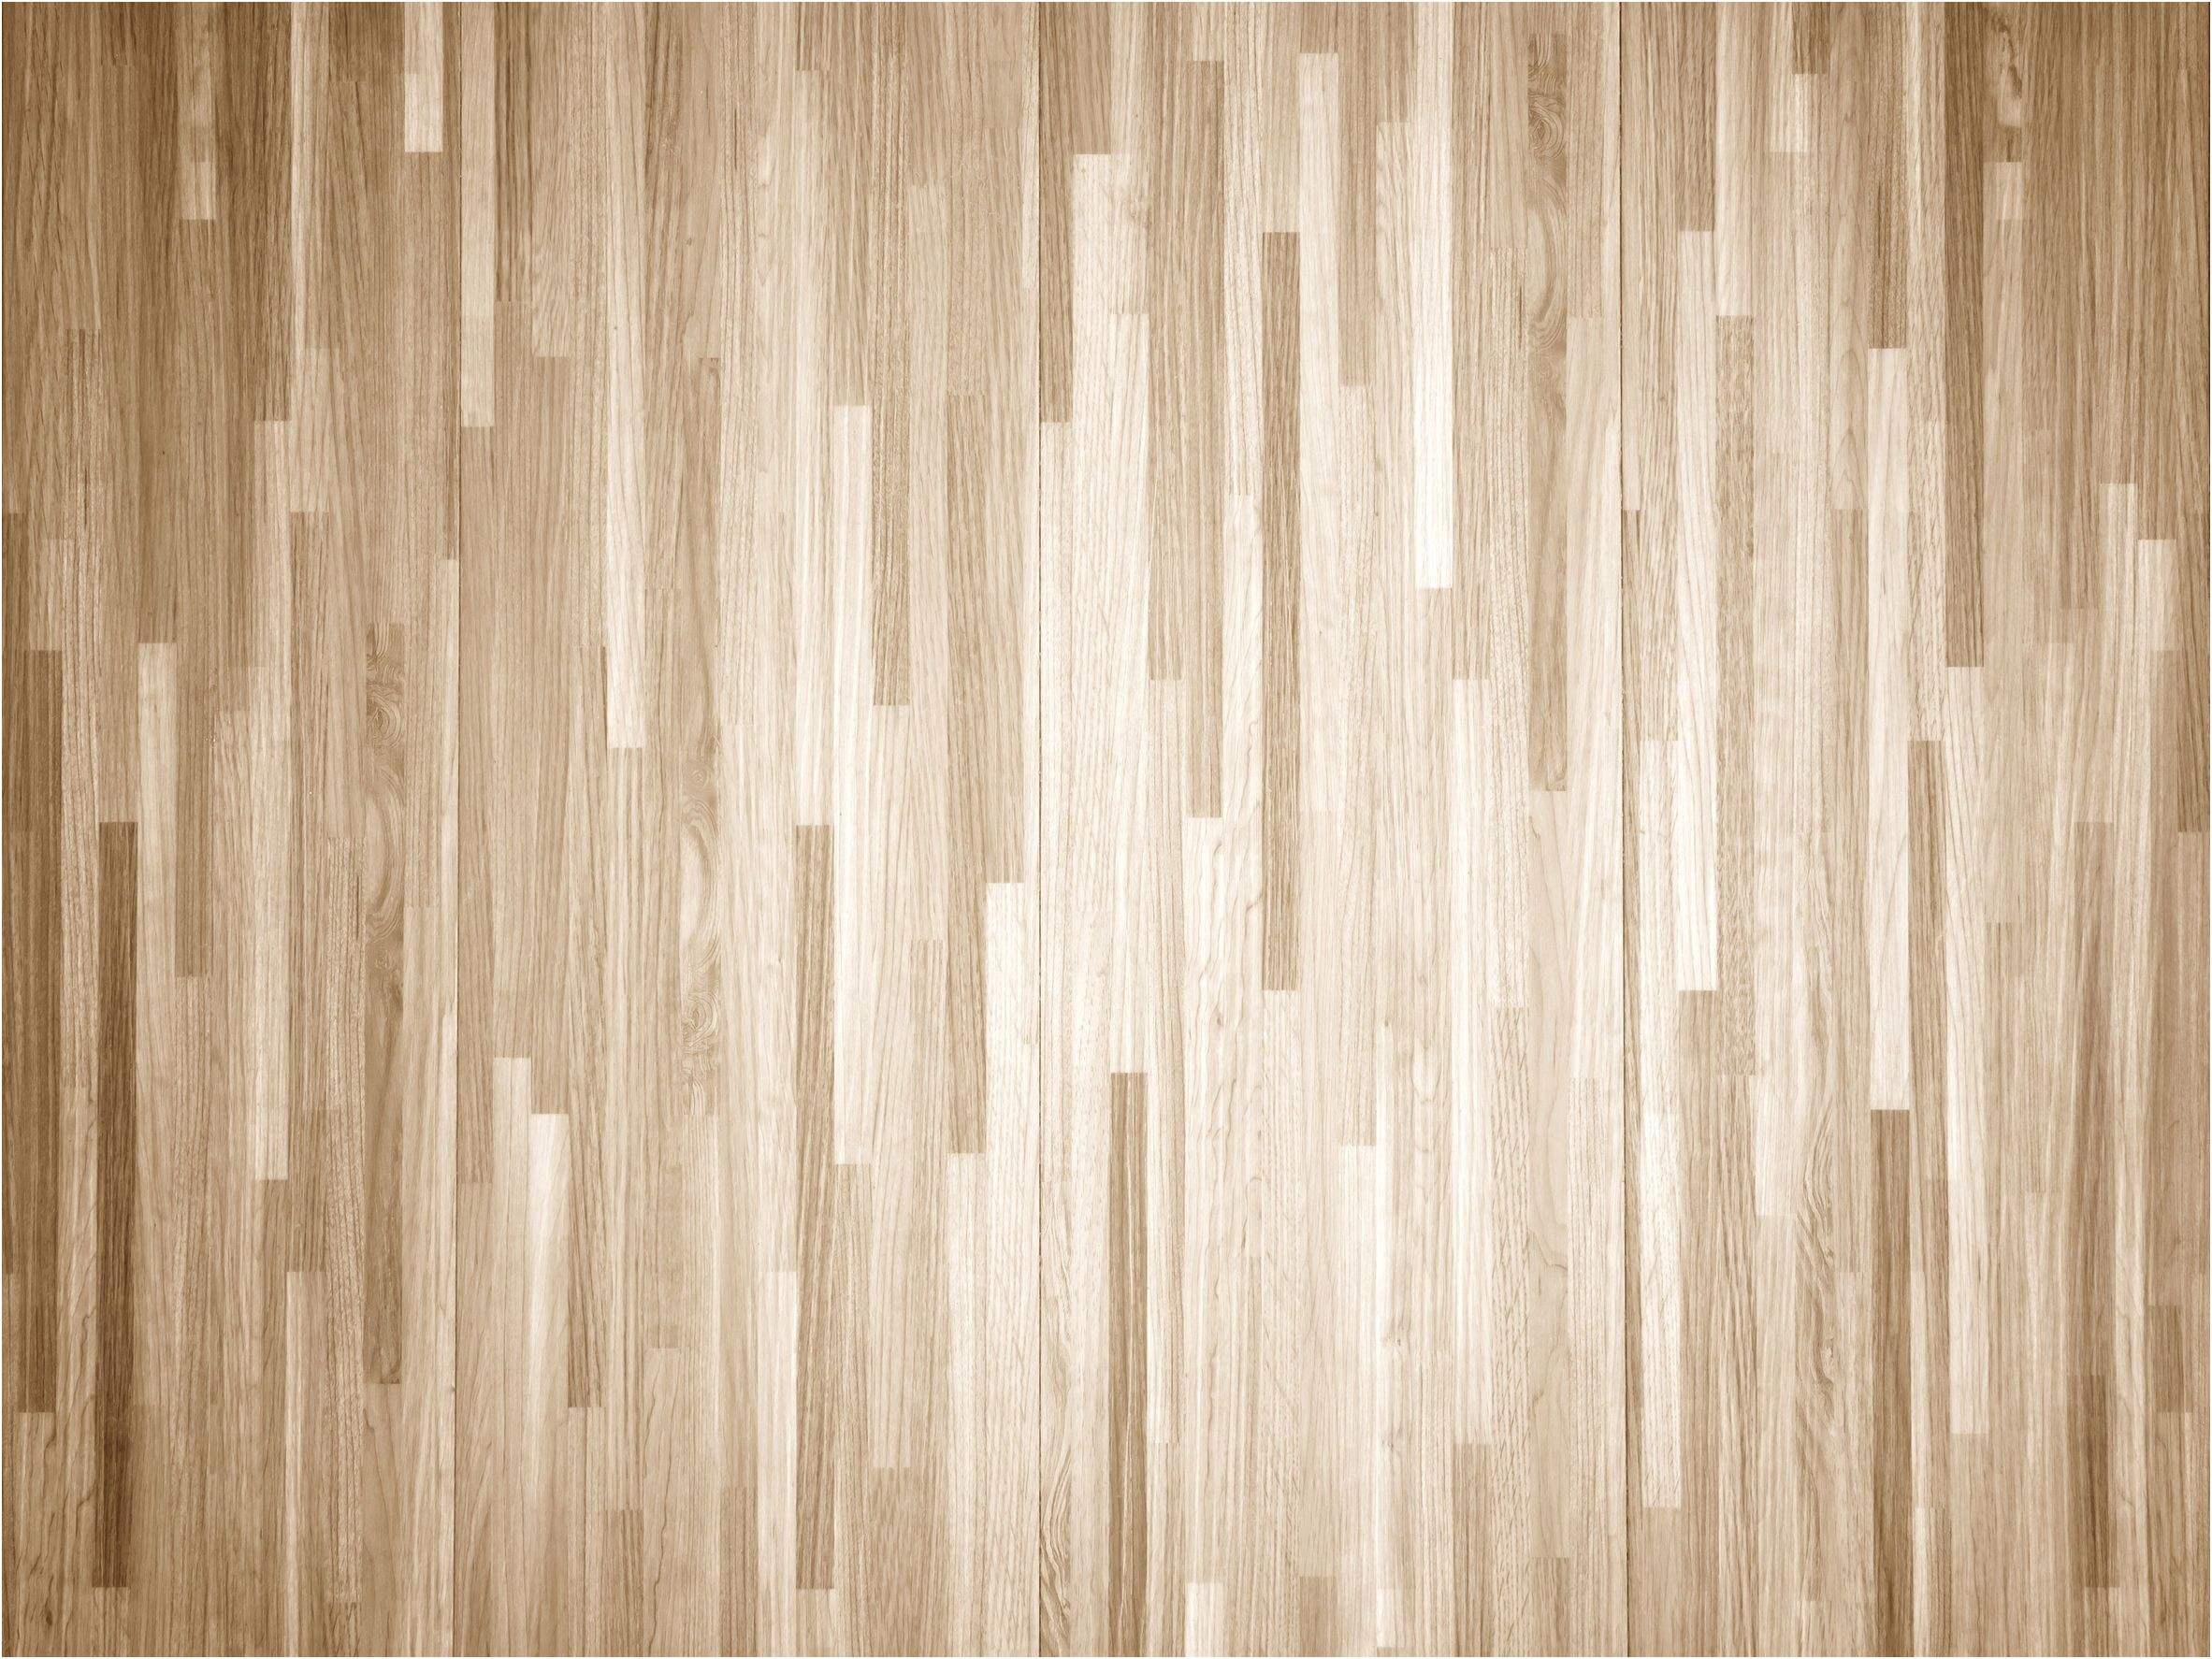 26 attractive Average Cost to Replace Hardwood Floors 2024 free download average cost to replace hardwood floors of how much it cost to install wood flooring collection floor how to throughout how much it cost to install wood flooring images how to chemically str